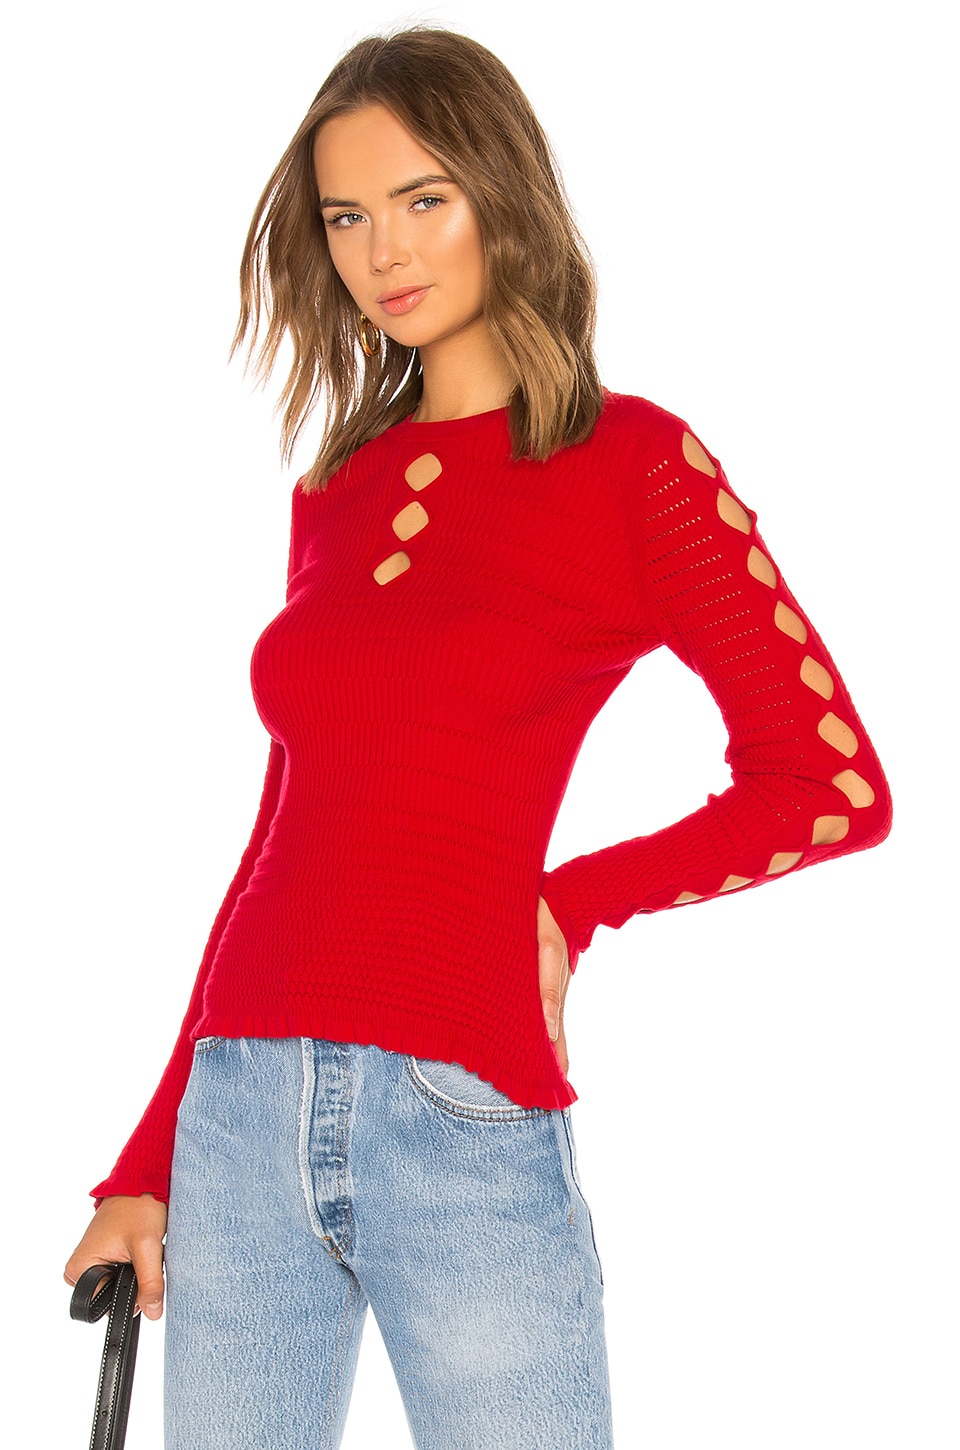 KENZO Fitted Lacehole Sweater,KZOR-WK15